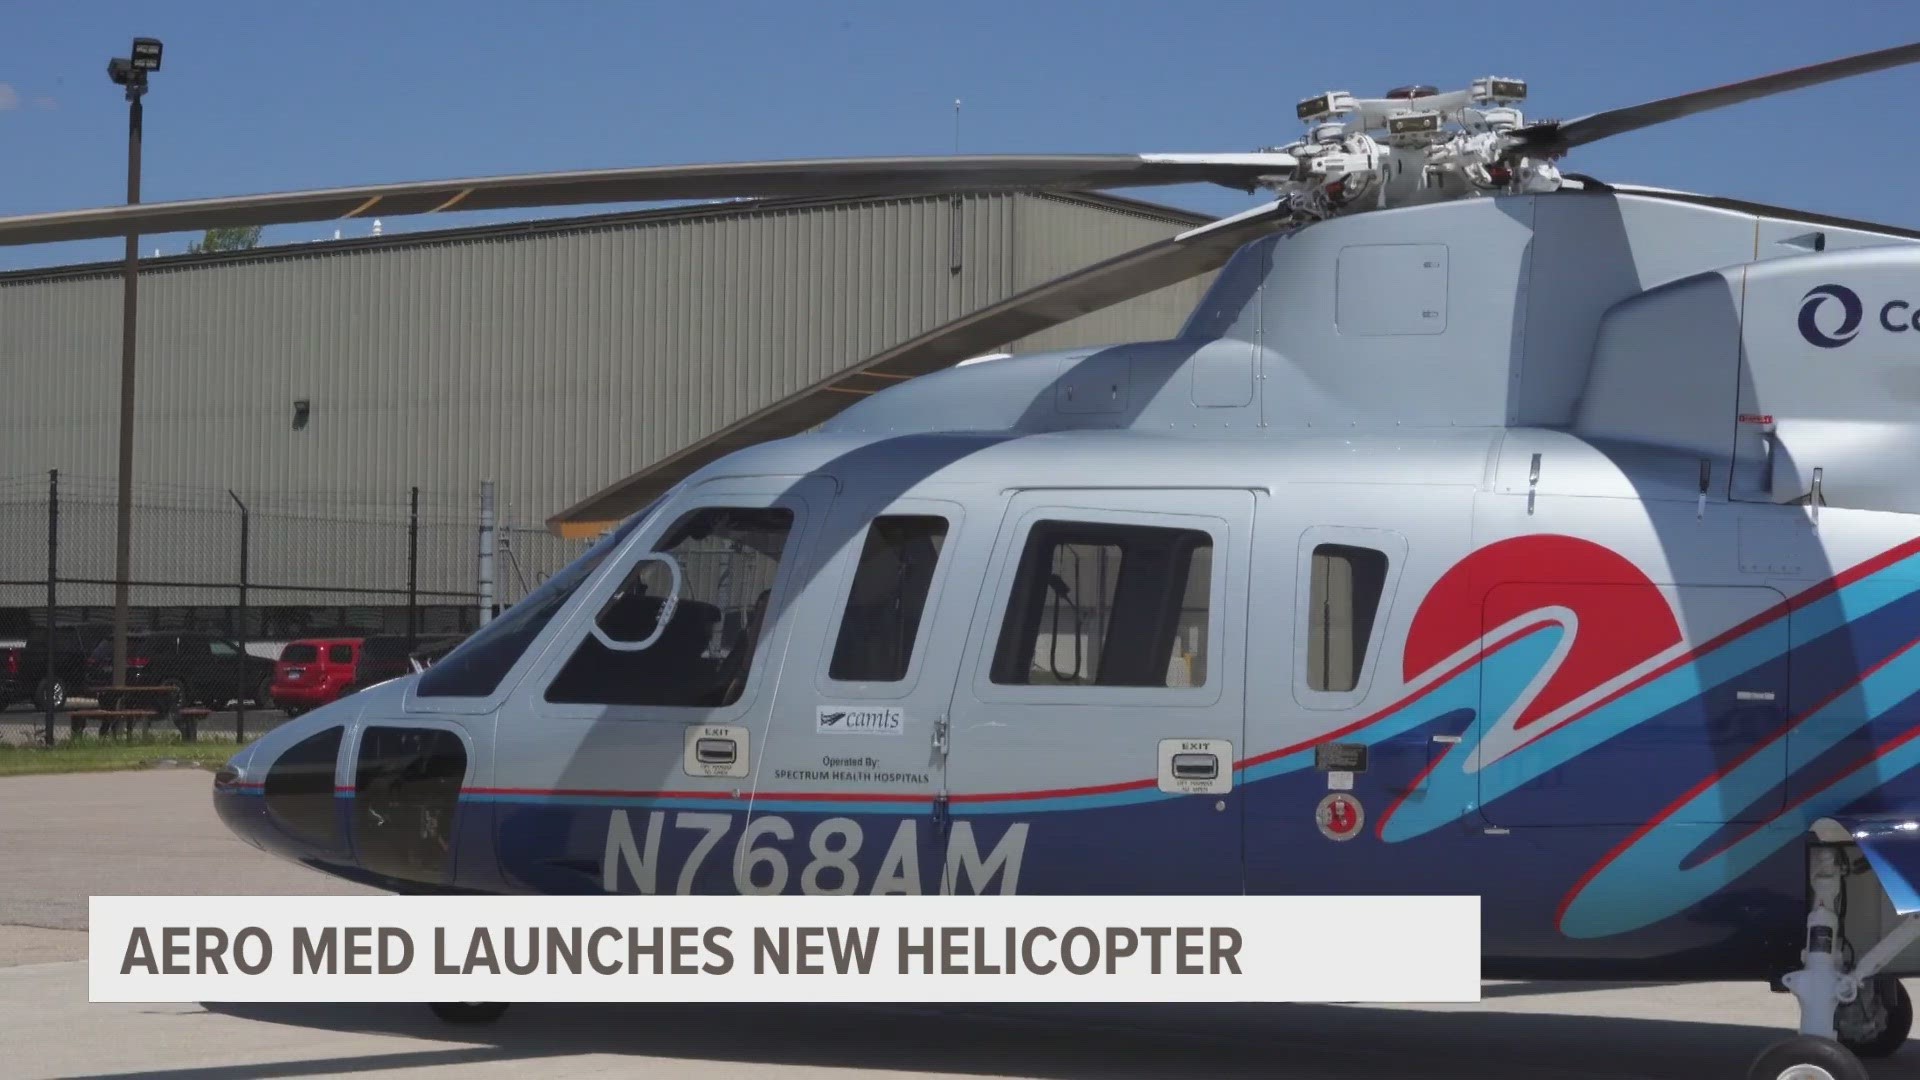 Corewell Health is adding a new ambulance helicopter to its fleet.